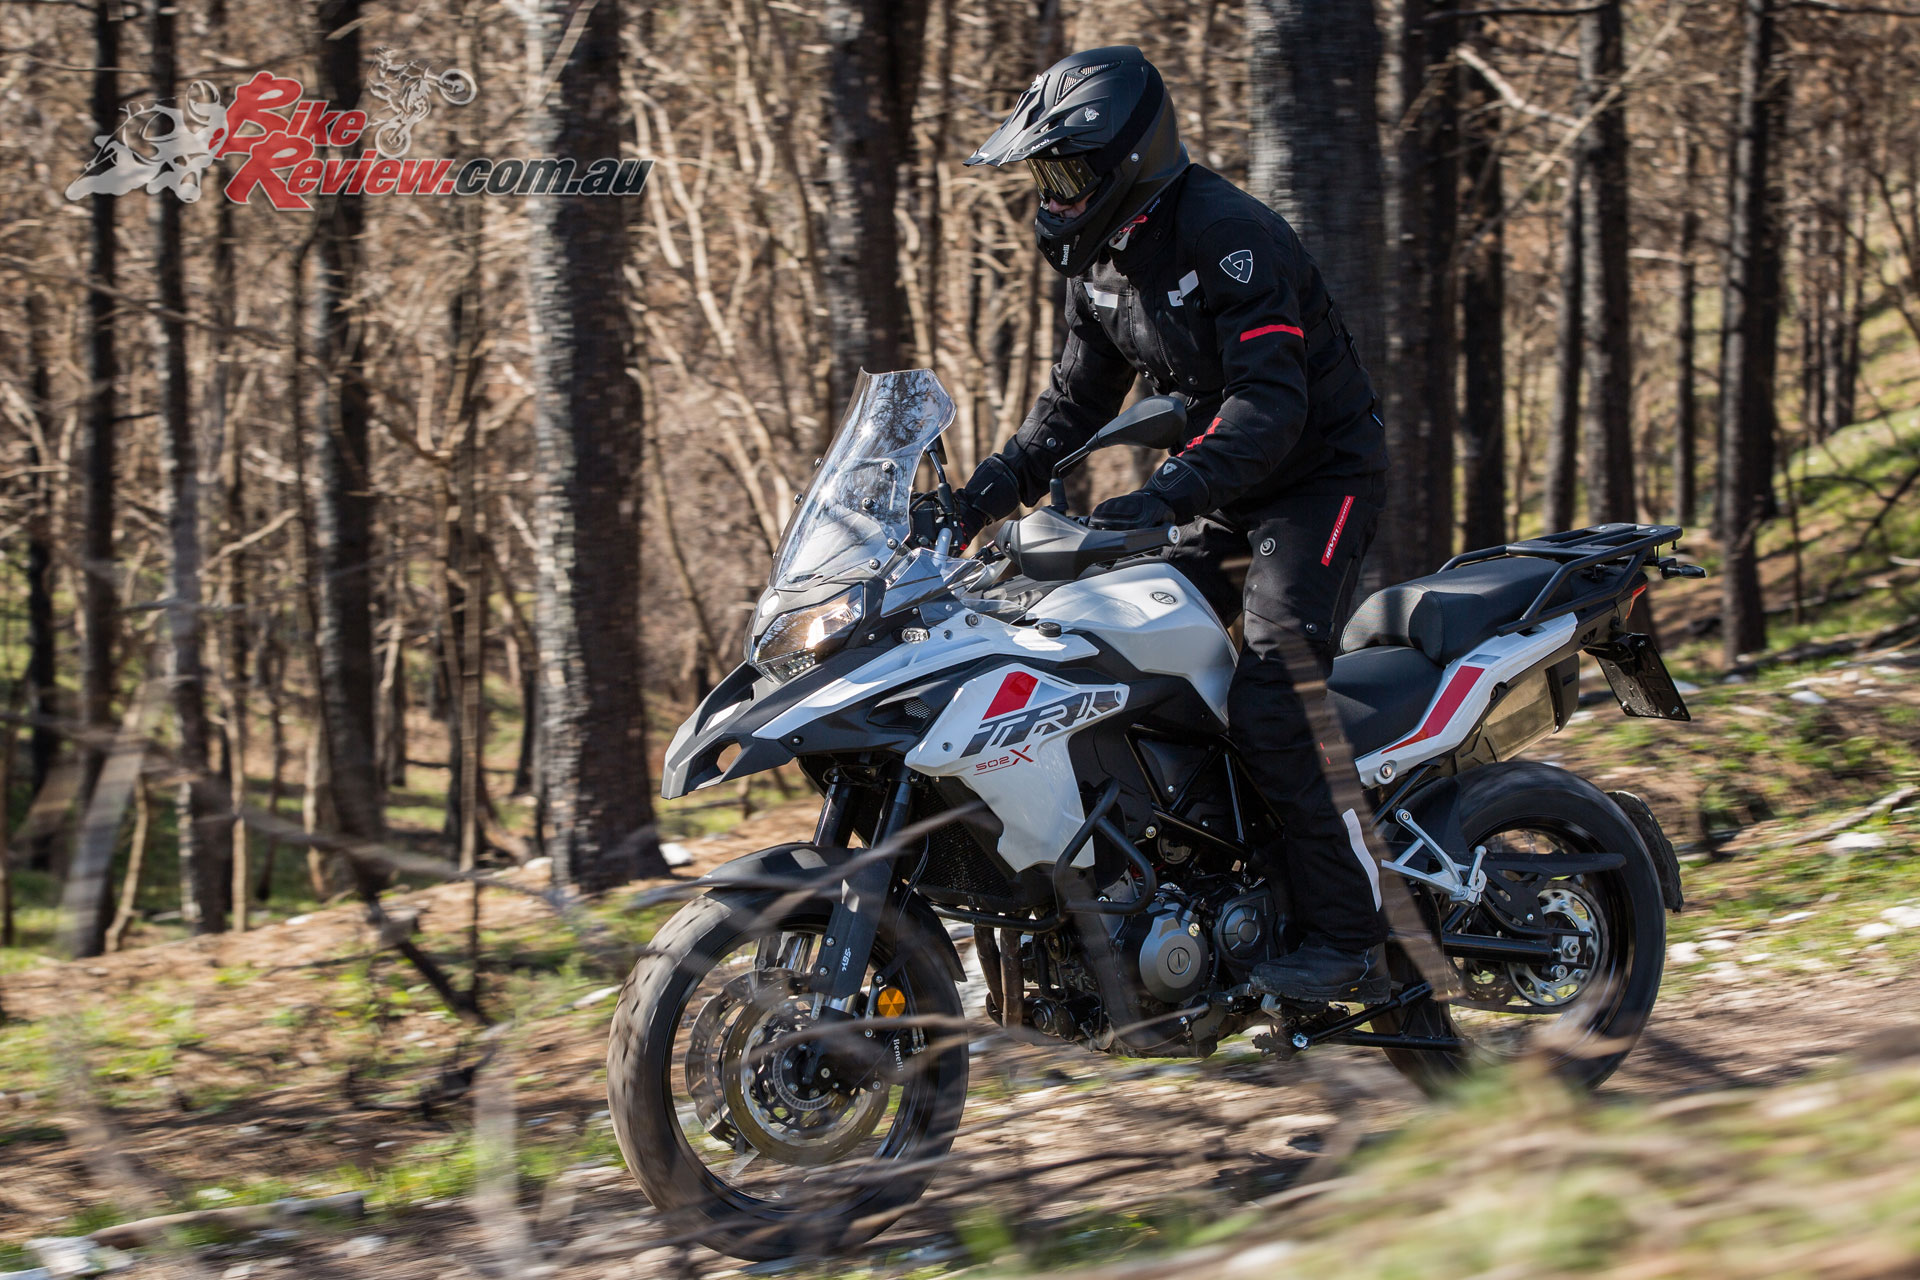 After being the #1 selling bike in Italy for 2020, Benelli's TRK 502 reached another important milestone recently, reporting the 10,000th unit being registered.